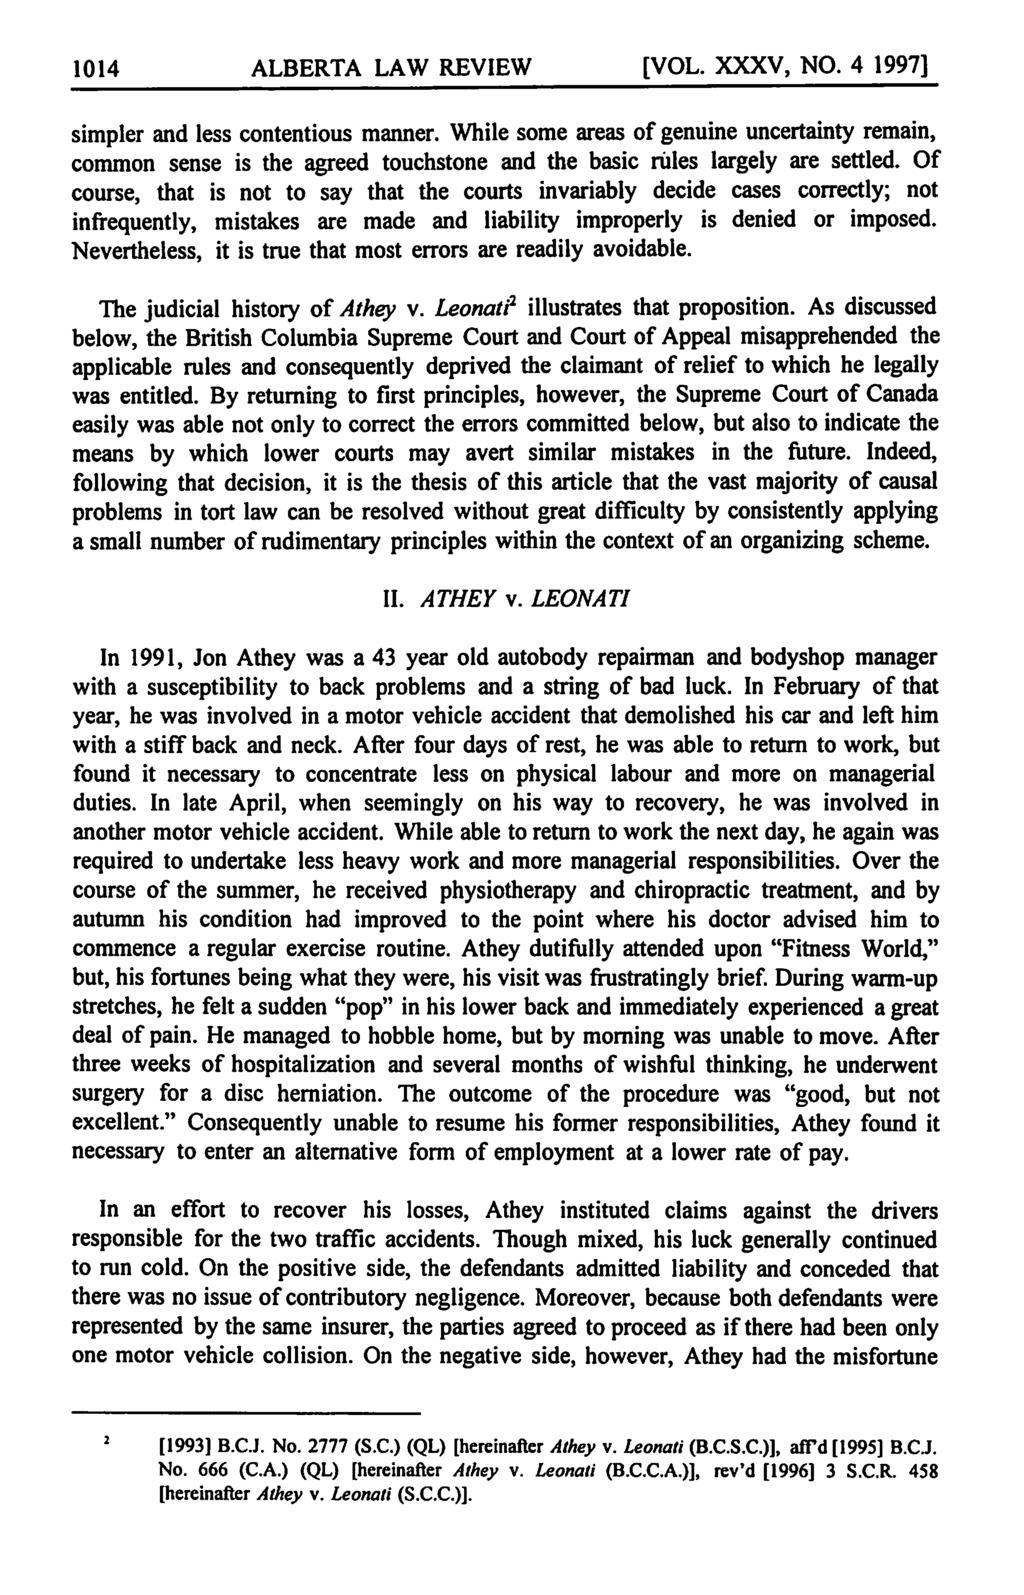 1014 ALBERTA LAW REVIEW [VOL. XXXV, NO. 4 1997) simpler and less contentious manner.